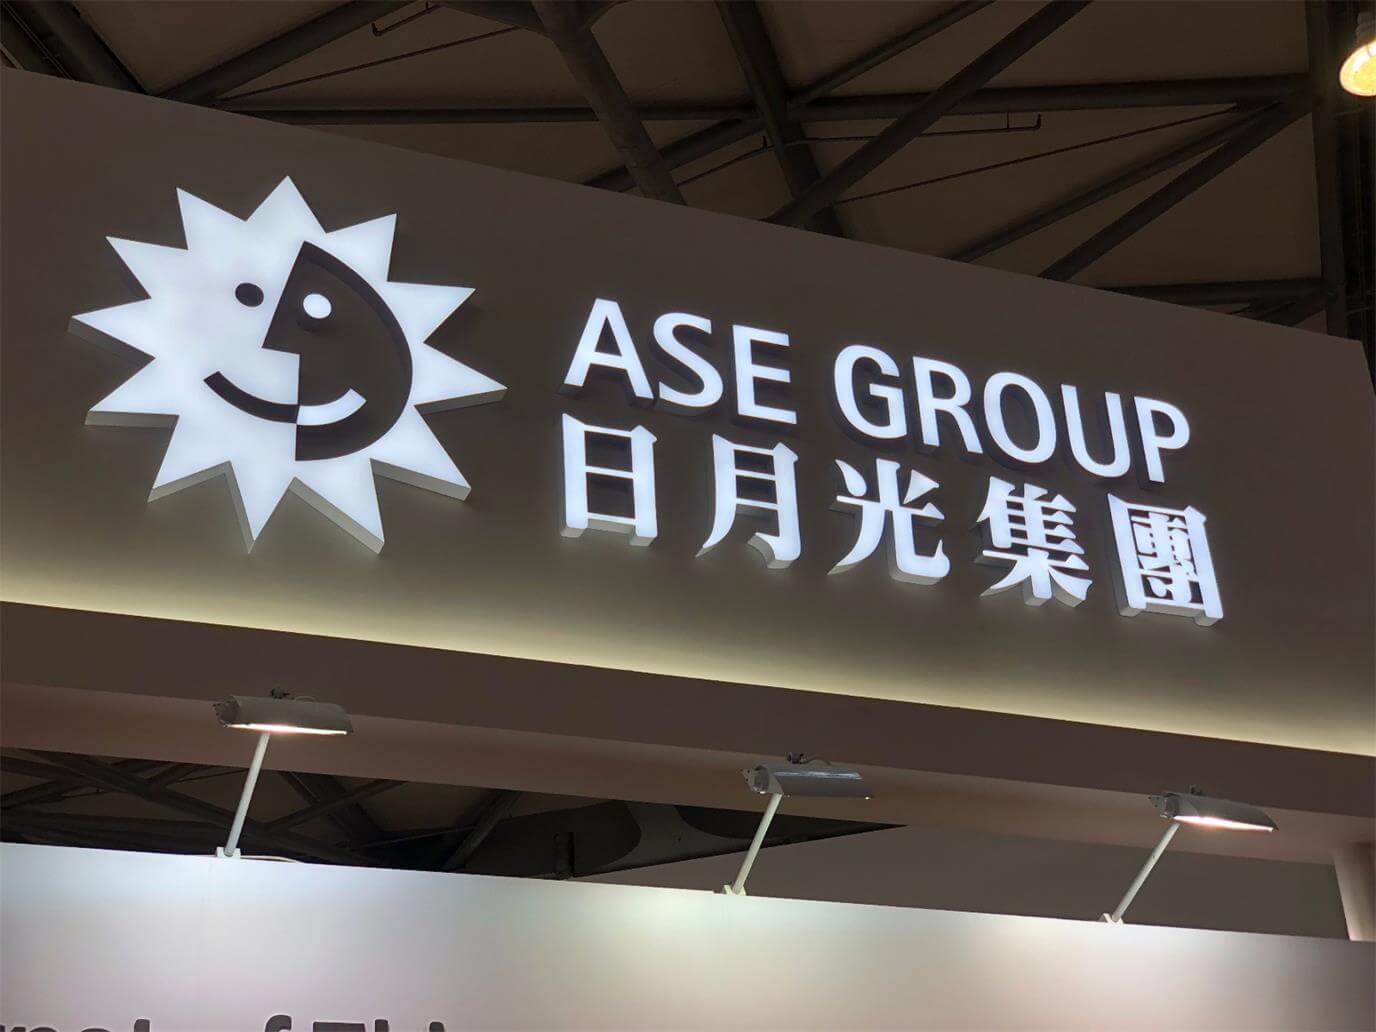 Group ase ASE Group